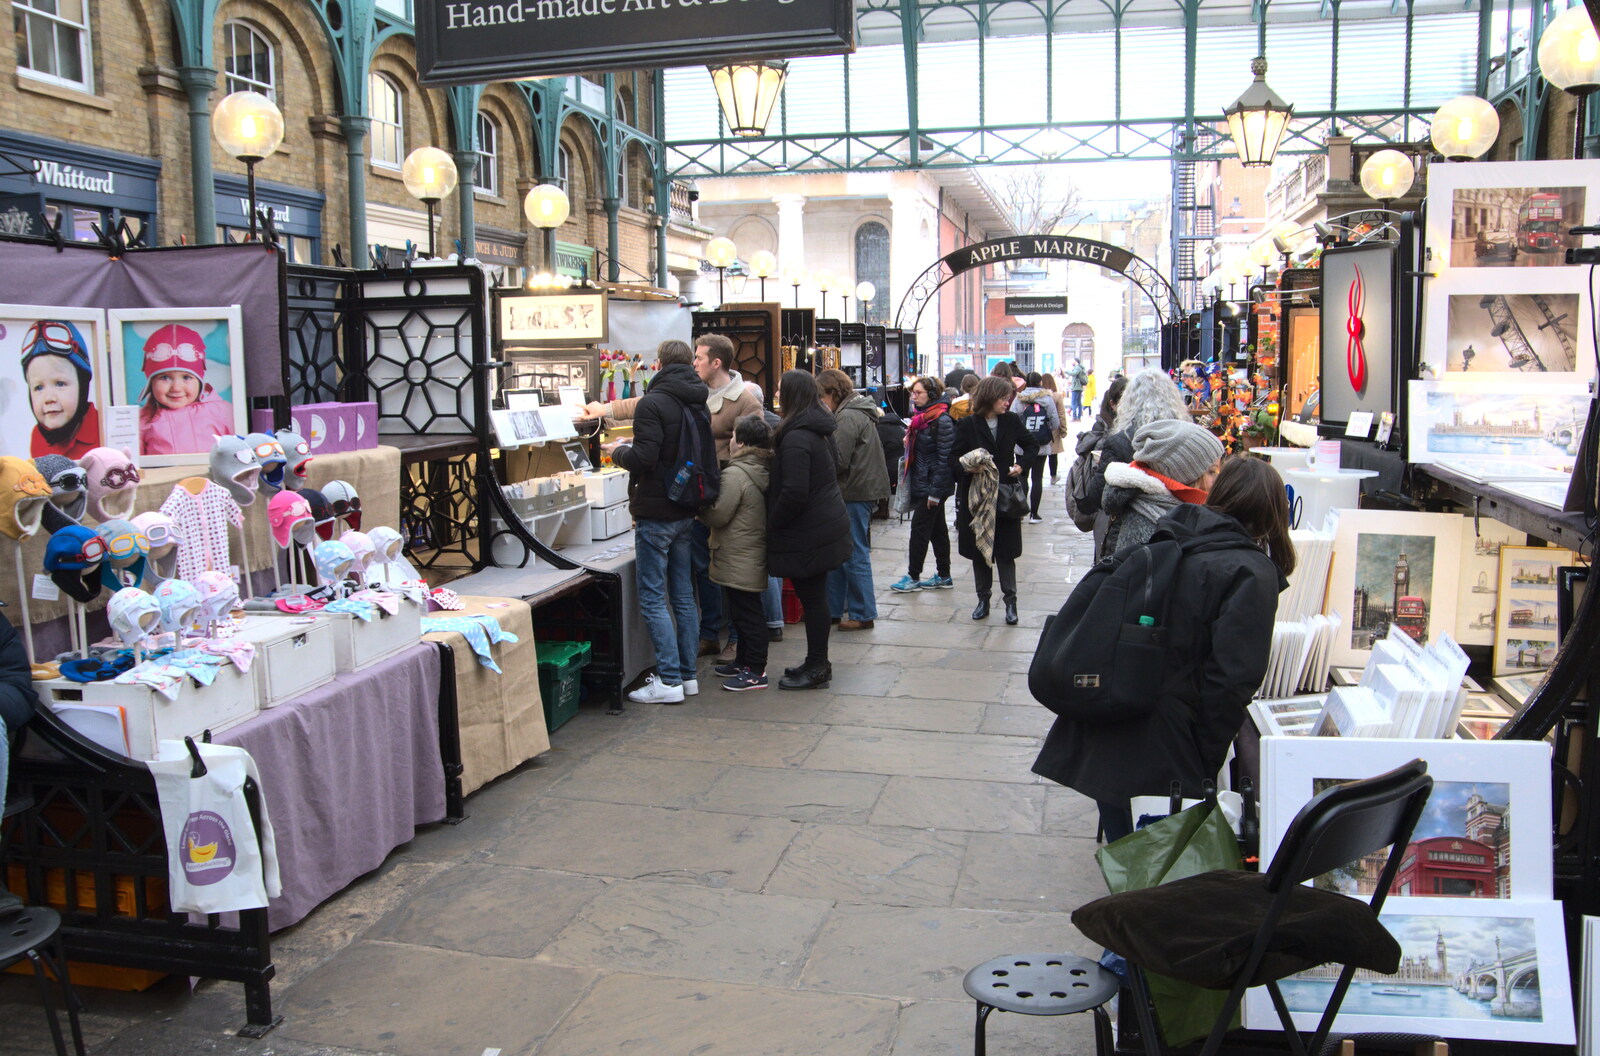 An art market in Covent Garden from A SwiftKey Memorial Service, Covent Garden, London  - 13th March 2020